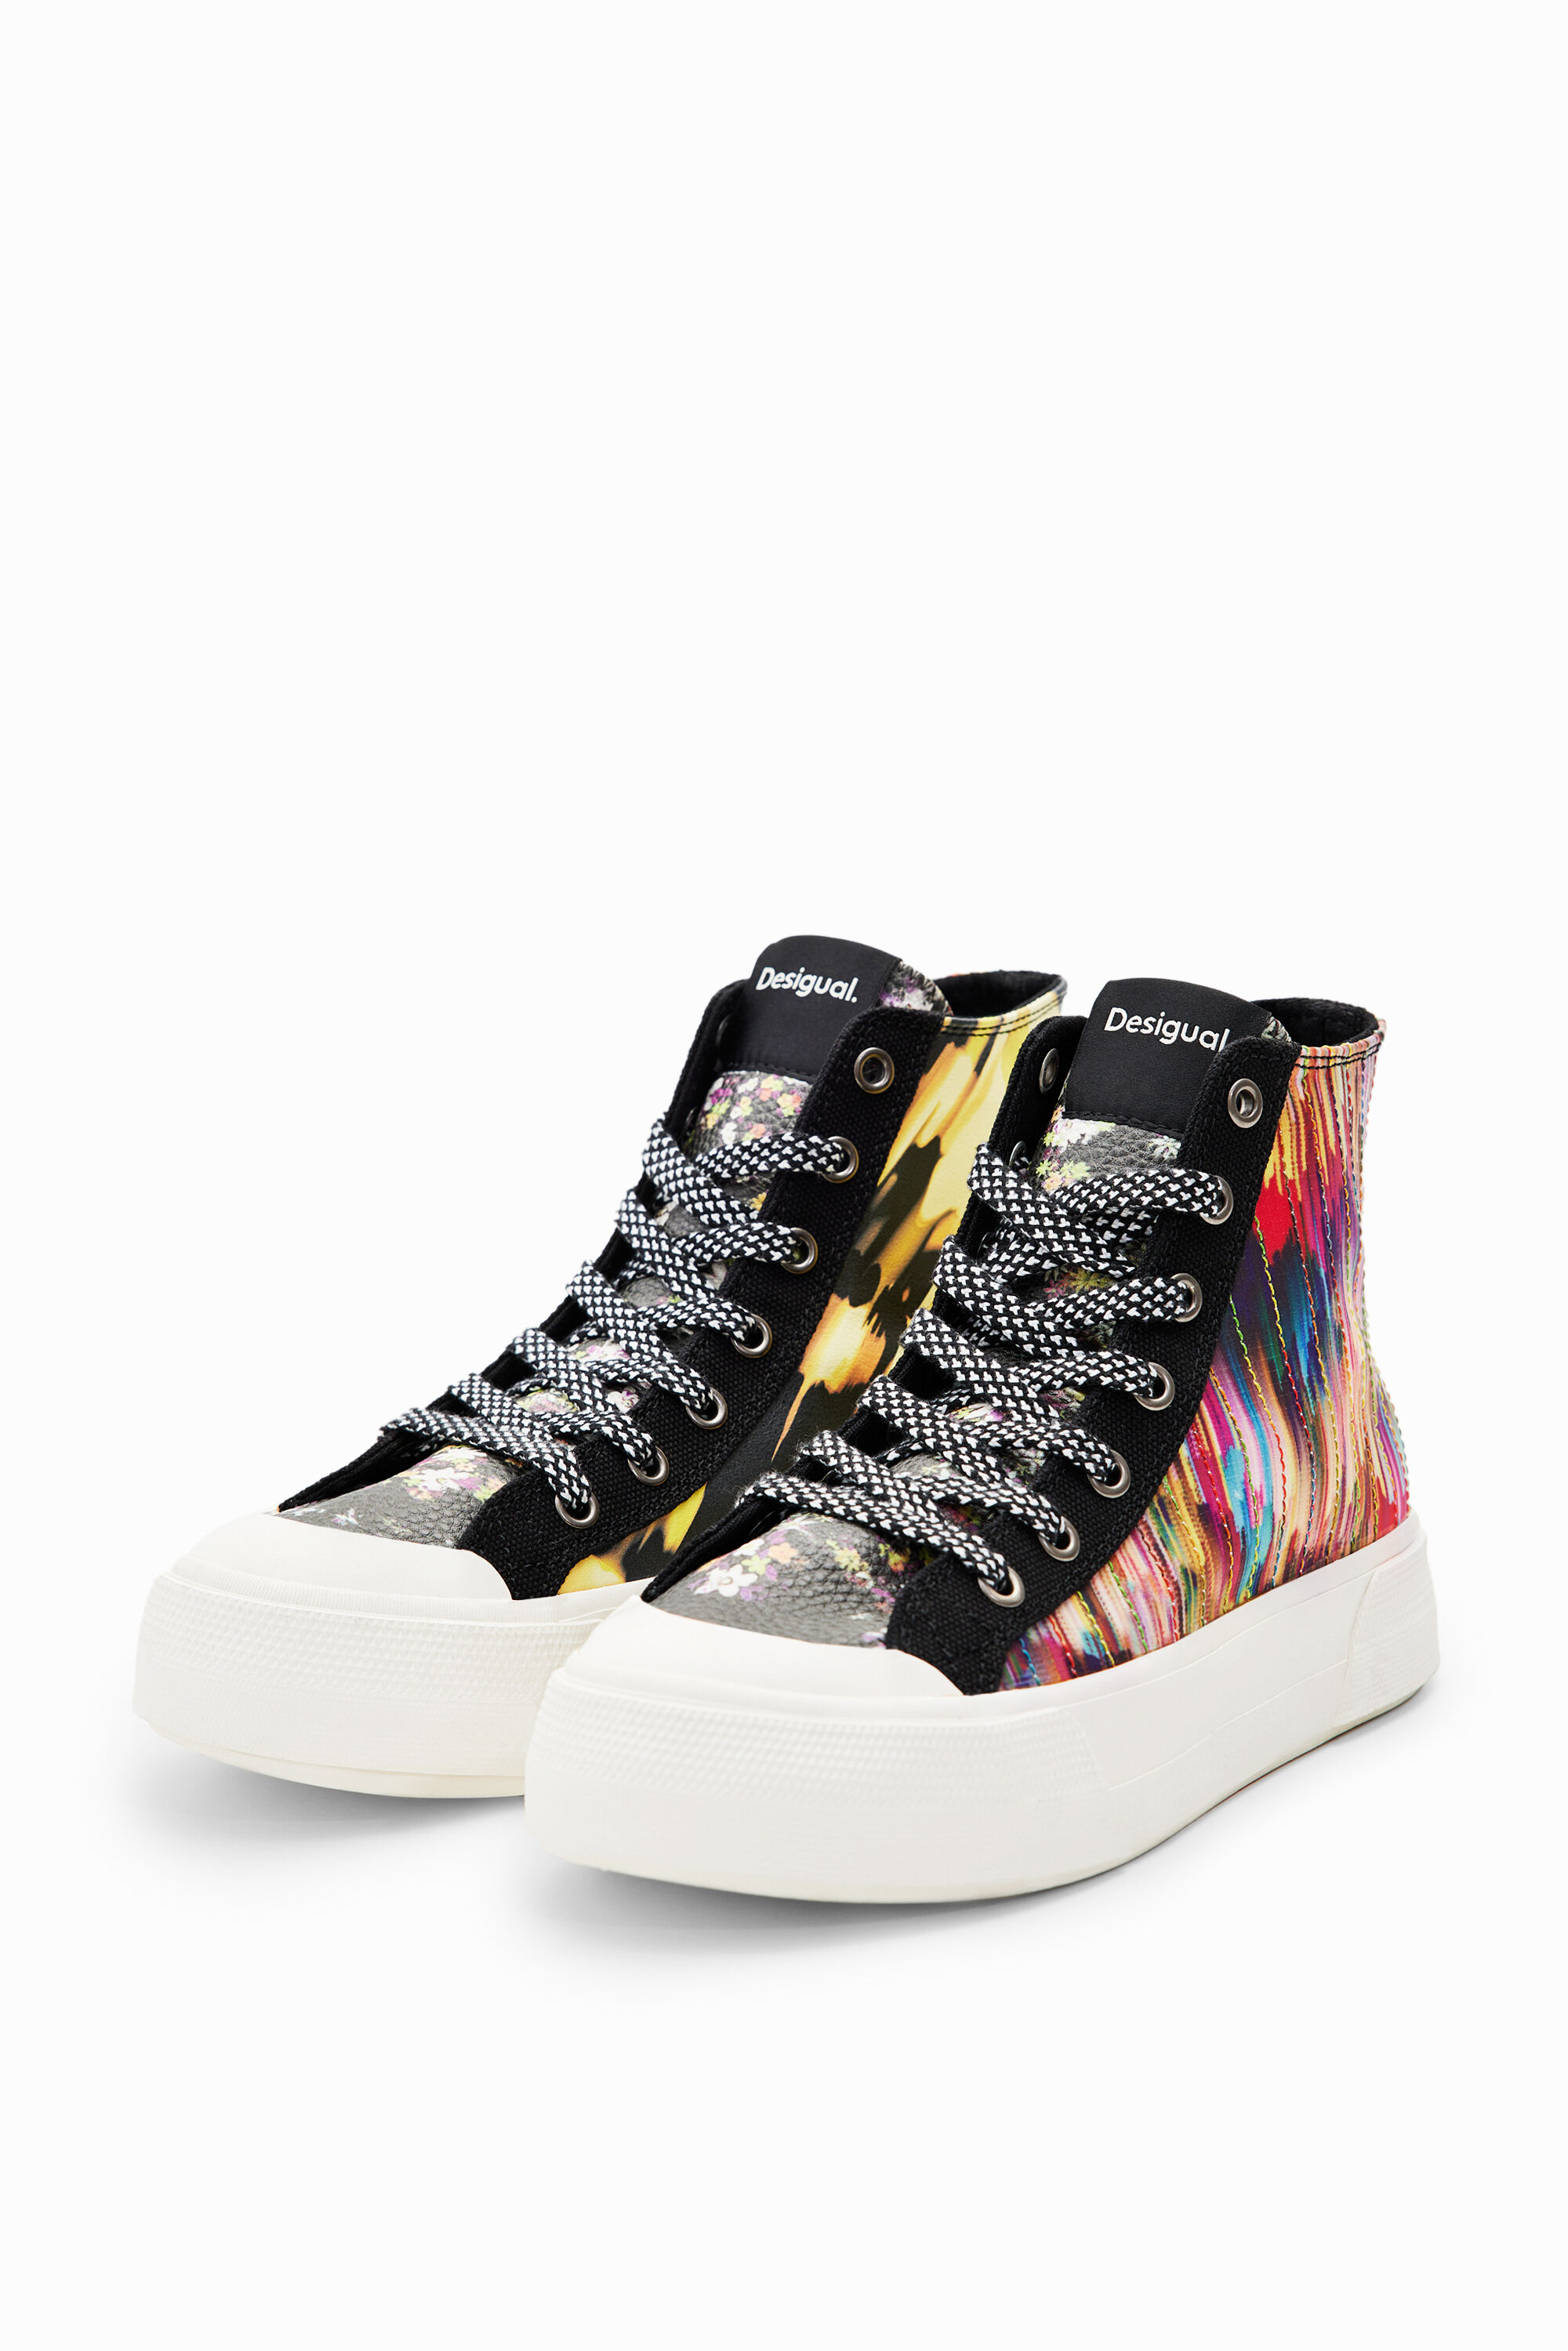 High-top glitch patchwork sneakers - MATERIAL FINISHES - 38